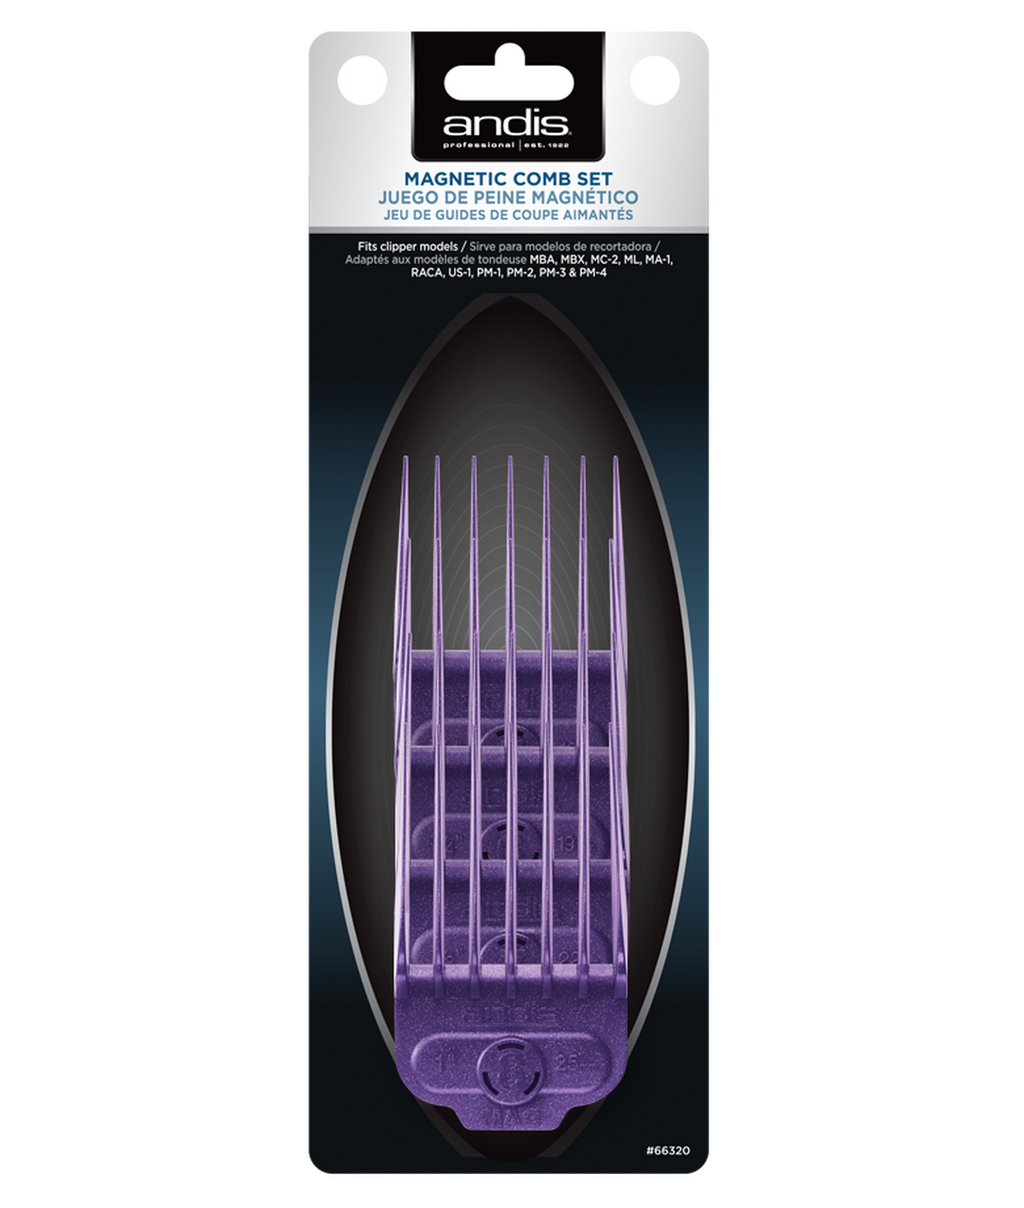 Andis Magnetic Comb Set #5 - #8